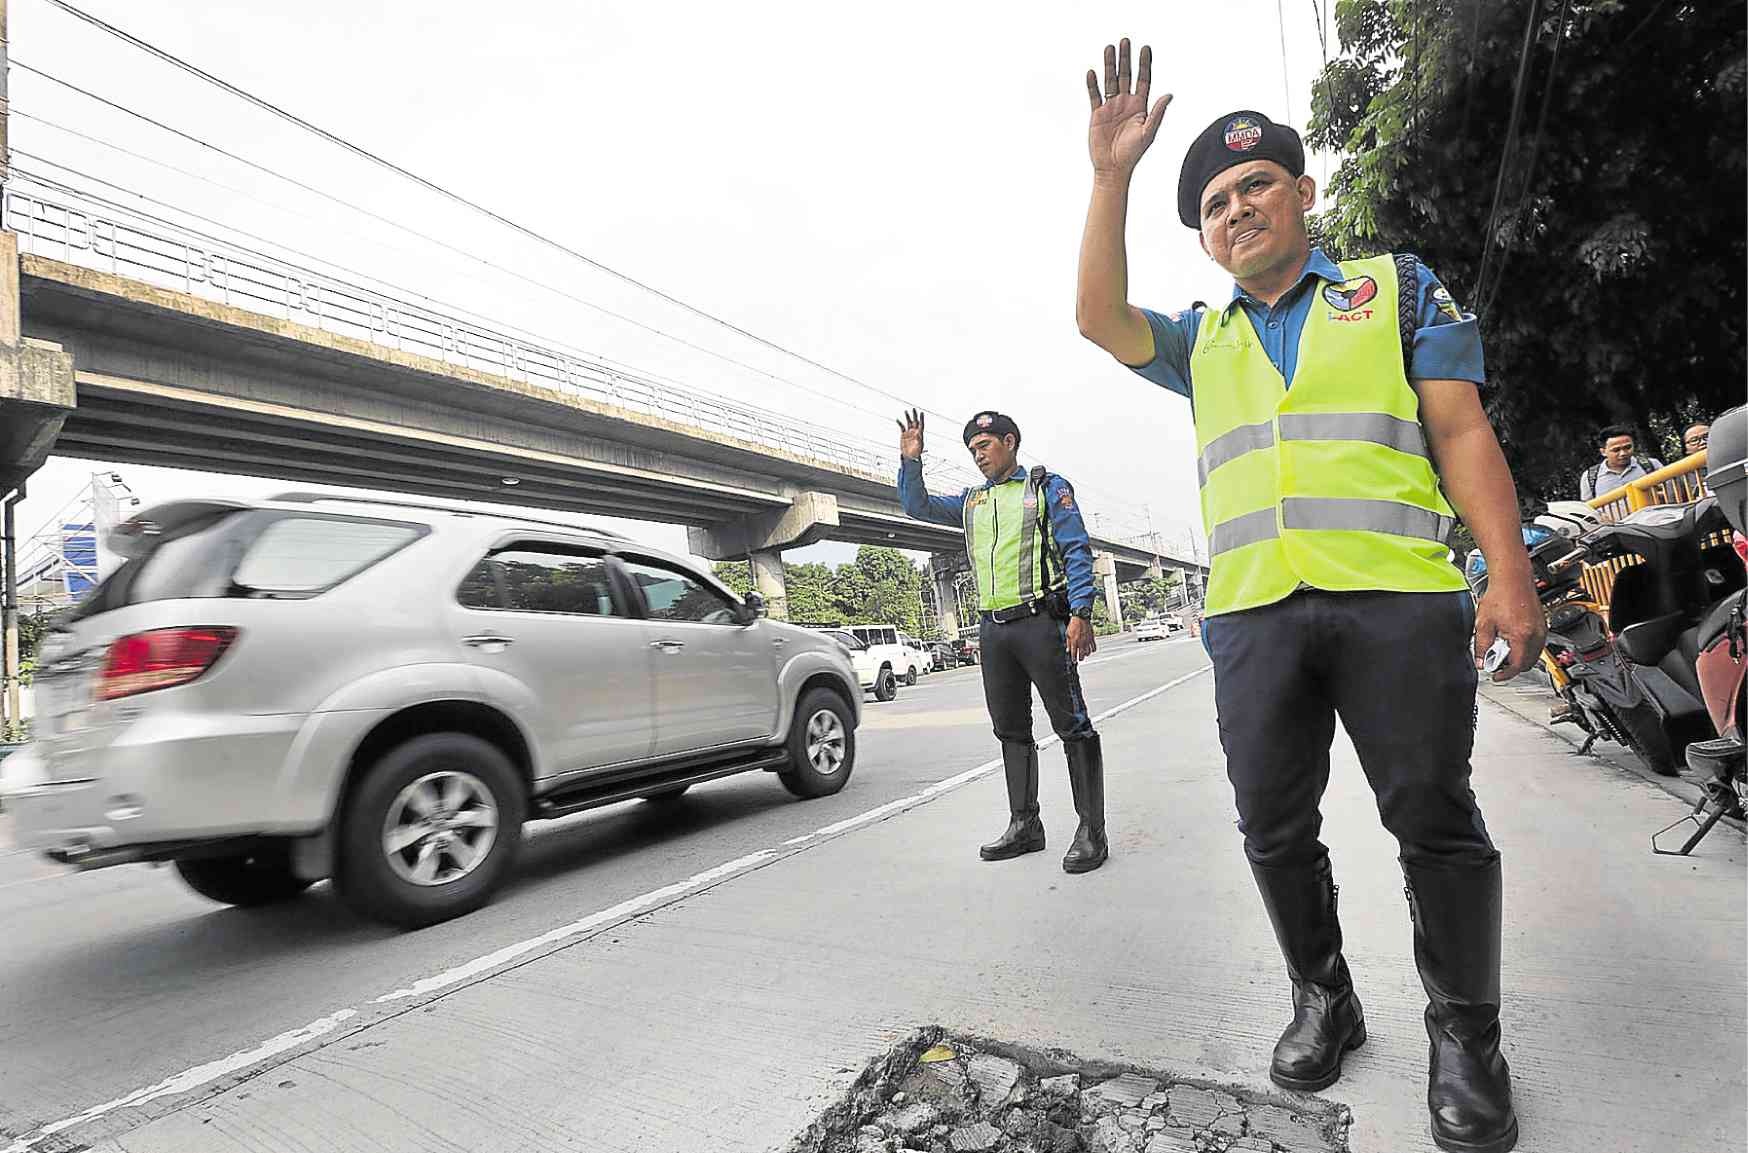 MMDA: Over 1,600 traffic personnel to assist motorists this Holy Week